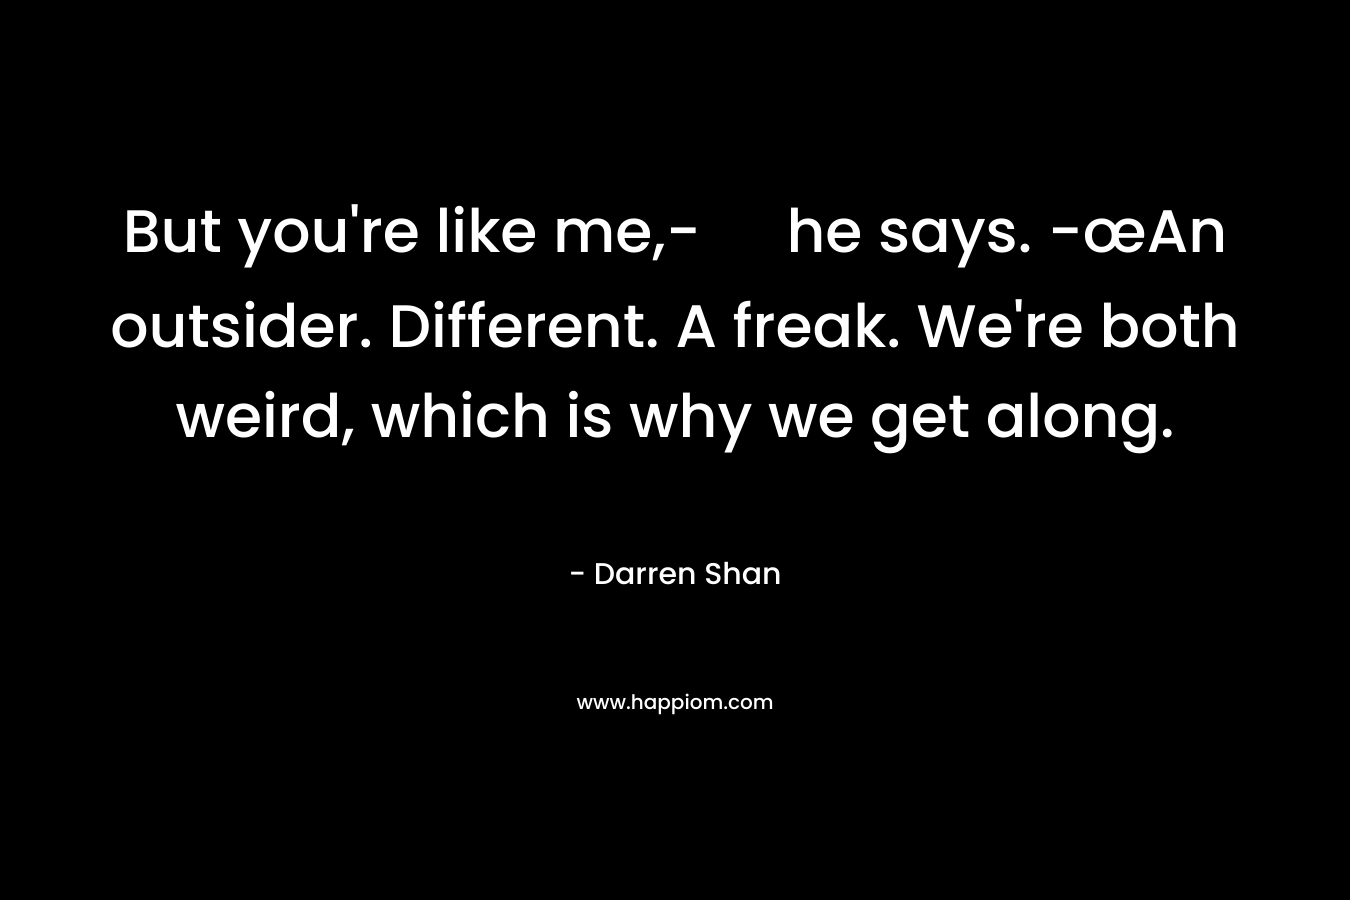 But you’re like me,- he says. -œAn outsider. Different. A freak. We’re both weird, which is why we get along. – Darren Shan